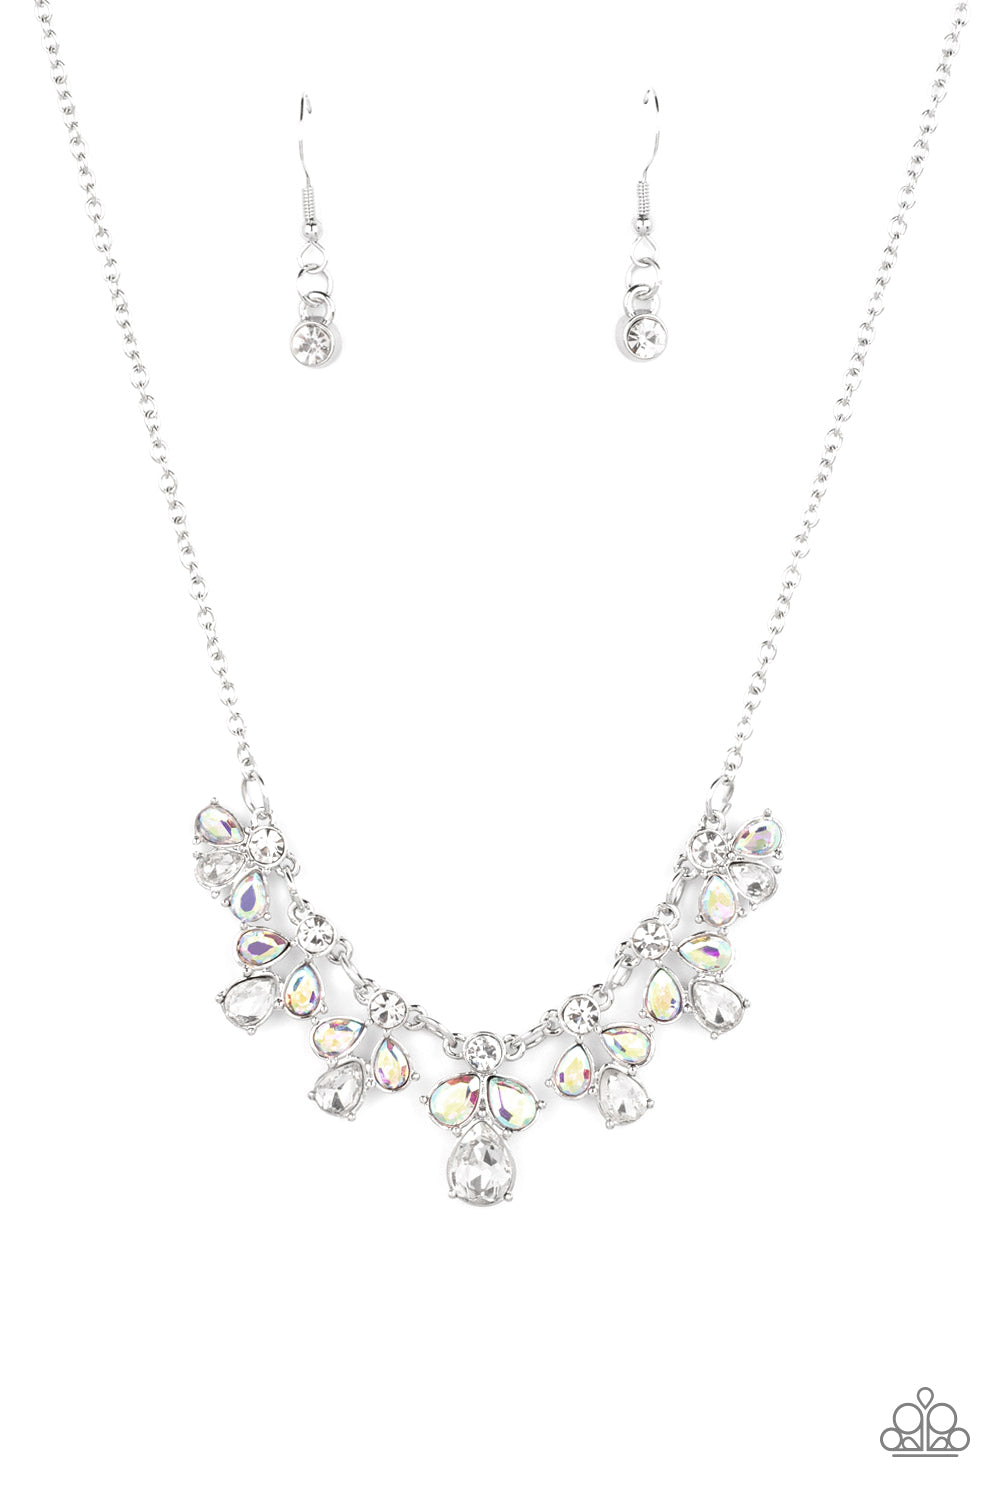 Paparazzi Accessories - See in a New STARLIGHT #L191 - White Necklace